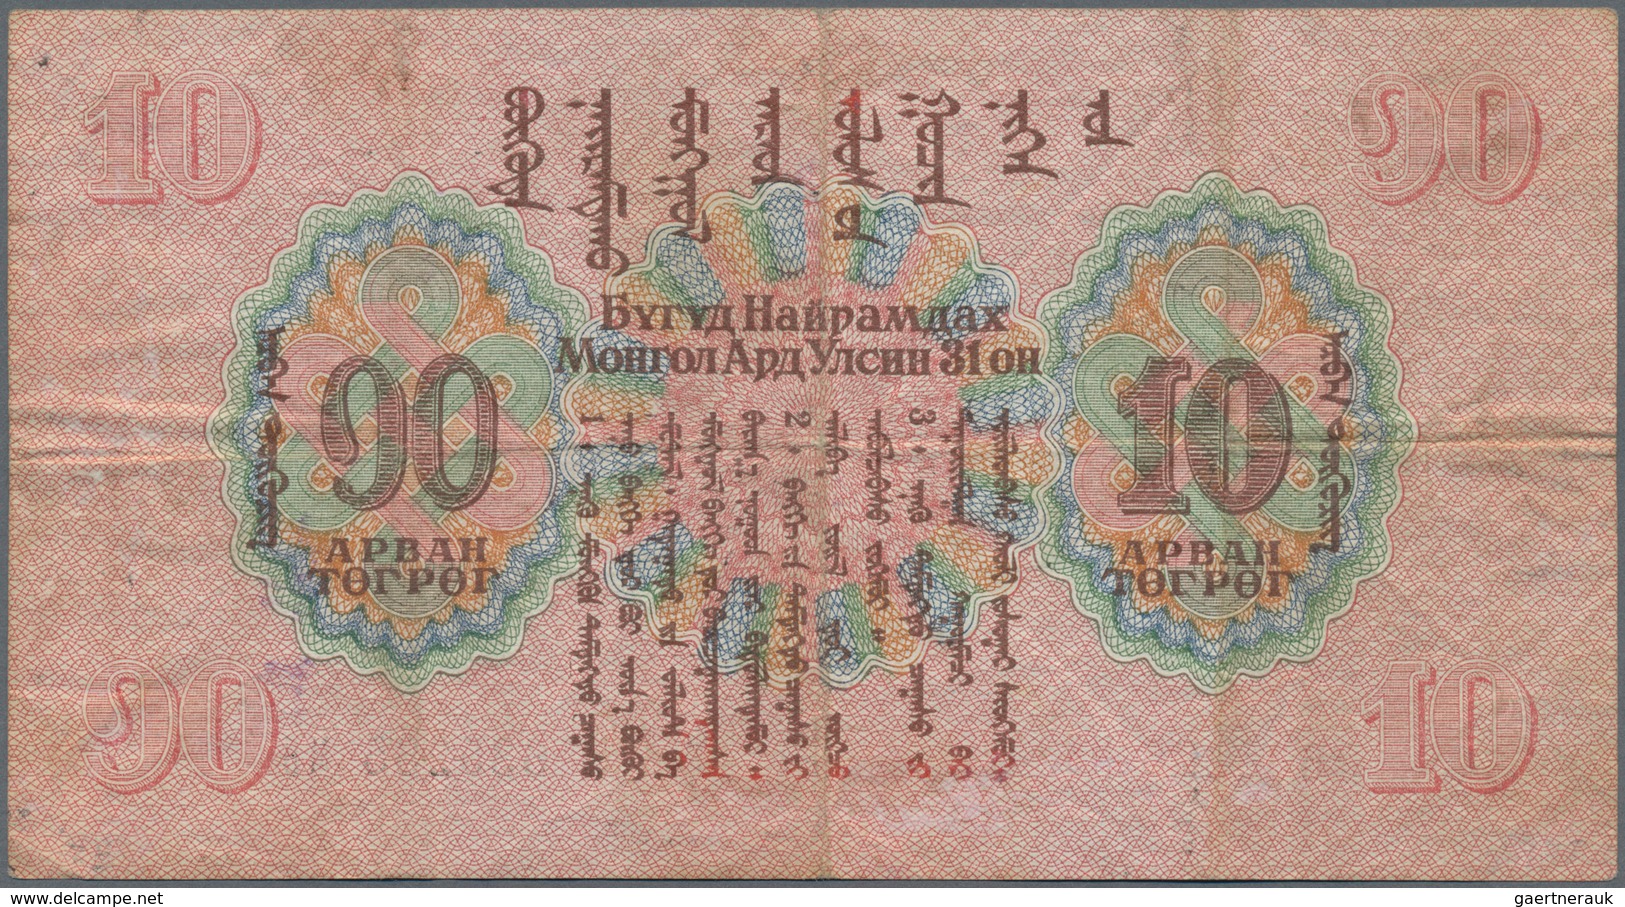 Mongolia / Mongolei: Nice and rare set with 4 Banknotes including 1 Tugrik 1939, 1, 10 and 25 Tugrik